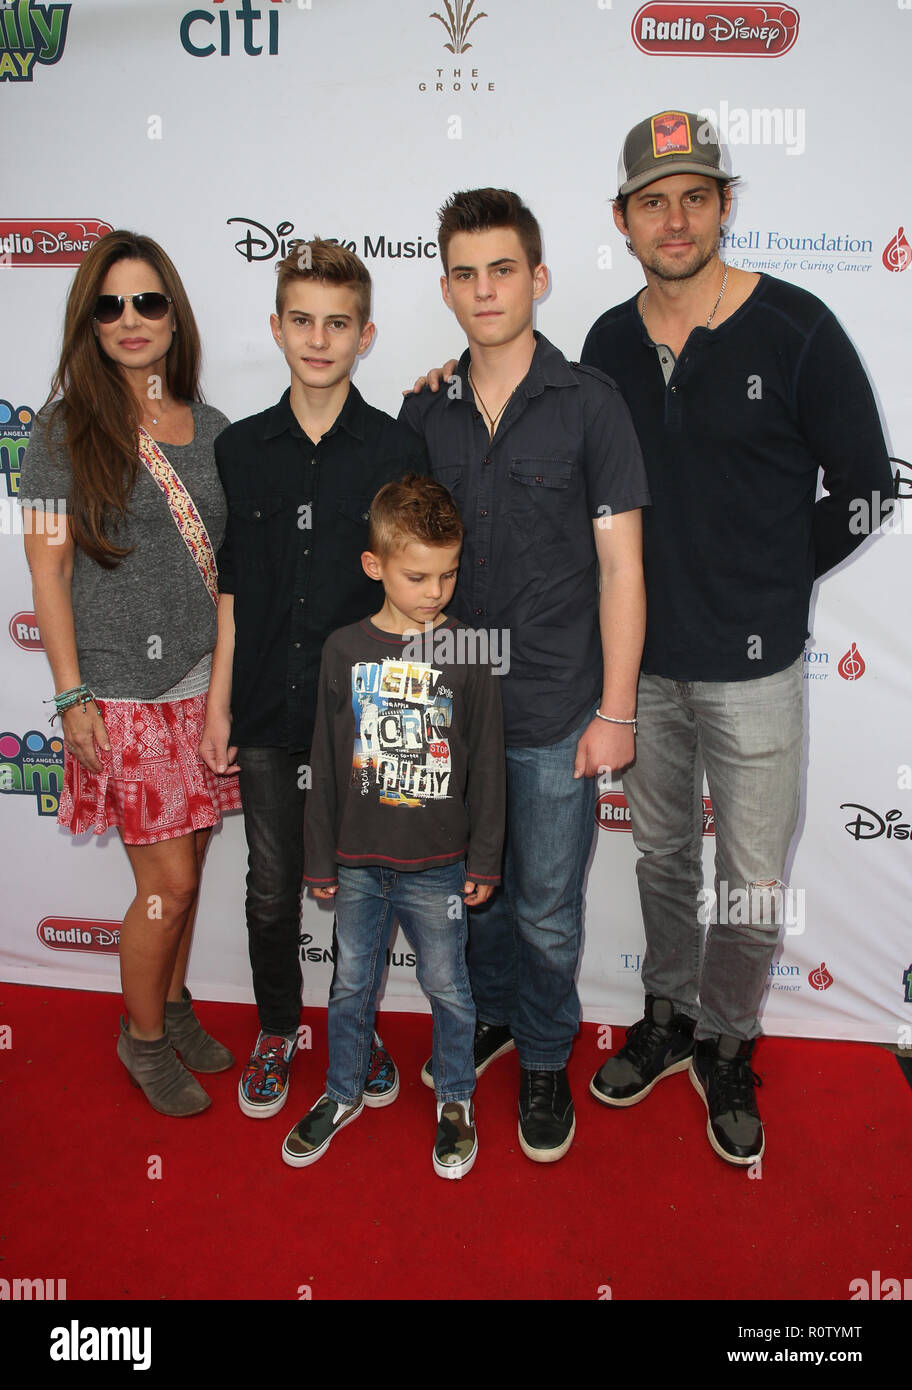 T.J. Martell Foundation Hosts 9th Annual LA Family Day  Featuring: Kristoffer Polaha, Julianne Morris, Micah Polaha, Kristoffer Caleb Polaha, Jude Polaha Where: Los Angeles, California, United States When: 07 Oct 2018 Credit: FayesVision/WENN.com Stock Photo